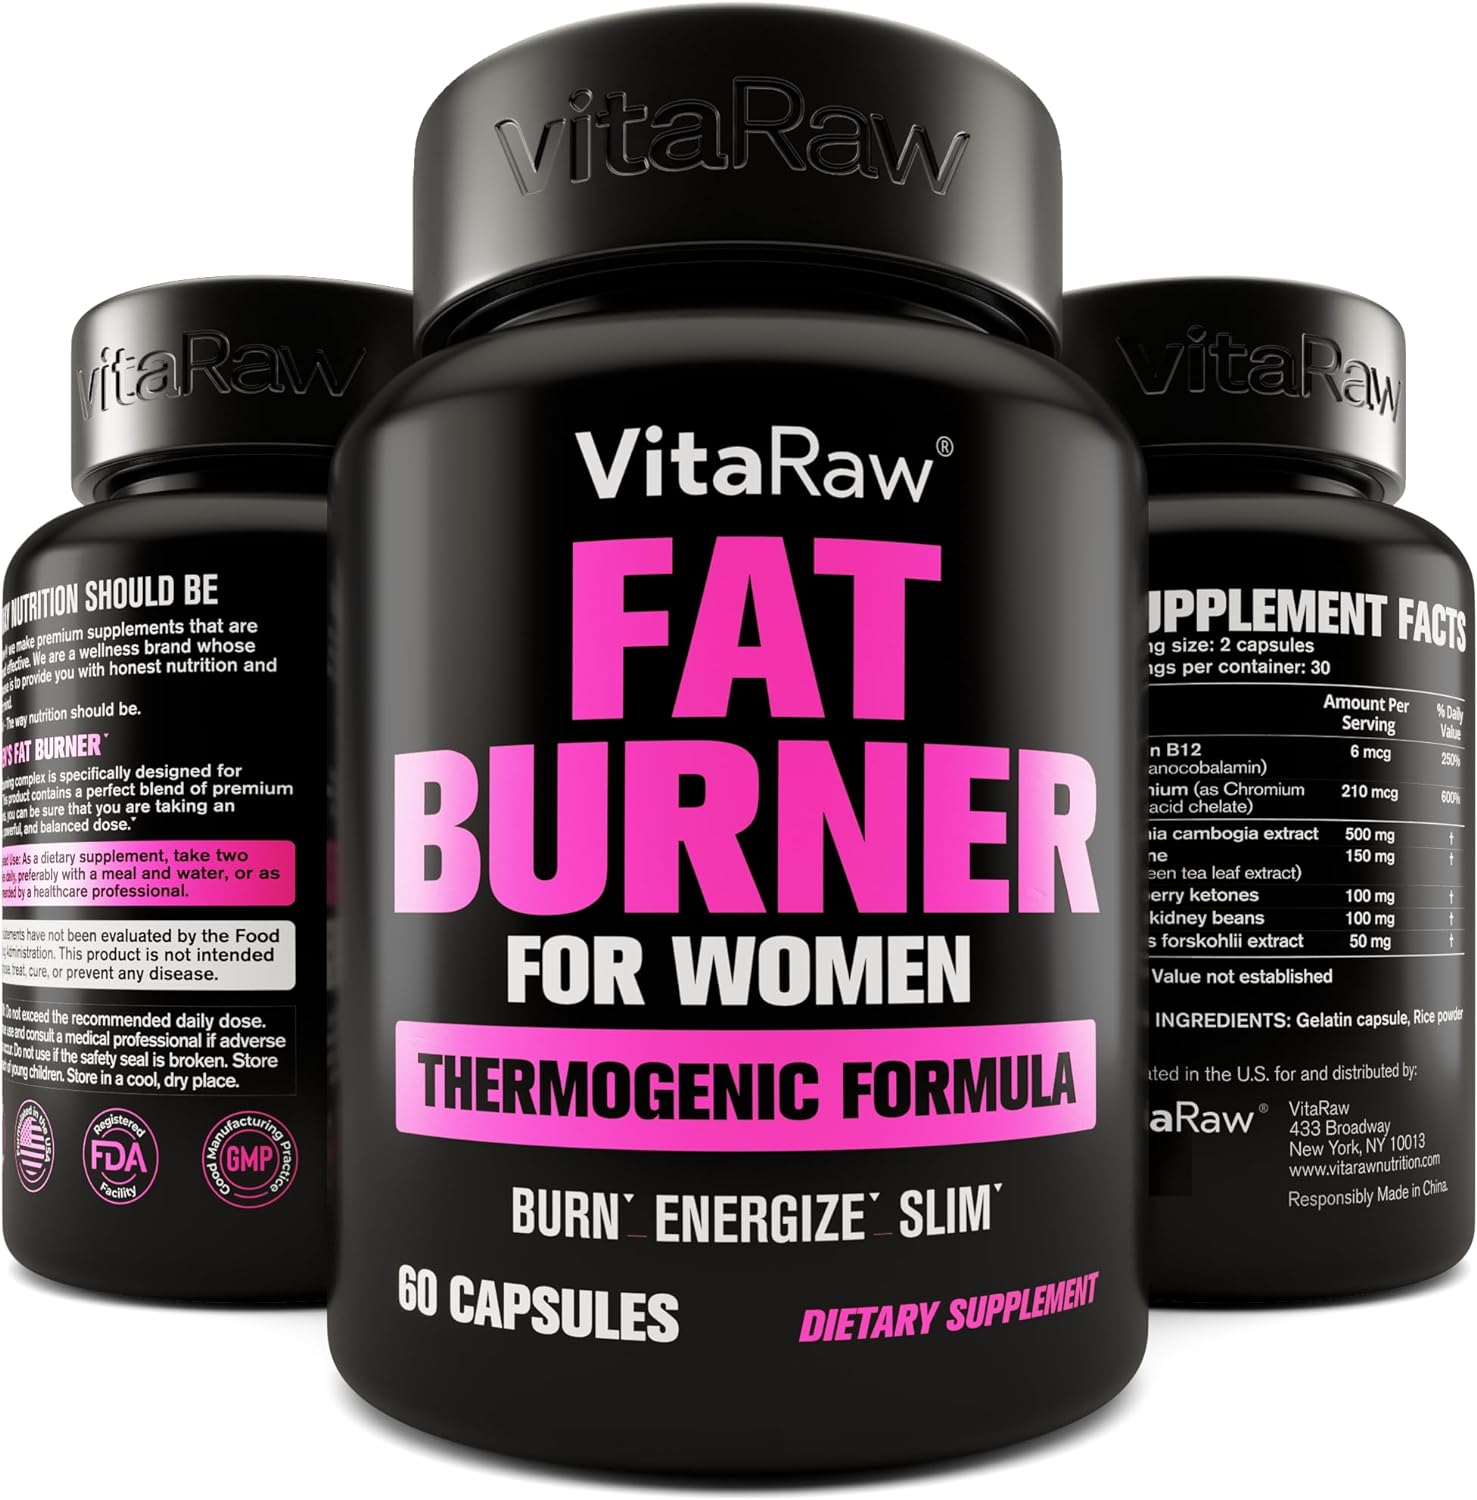 Weight Loss Pills for Women, Diet Pills for Women, The Best Fat Burners for Women, This Thermogenic Fat Burner is a Natural Appetite Suppressant  Metabolism Booster Supplement, Helps Reduce Belly Fat